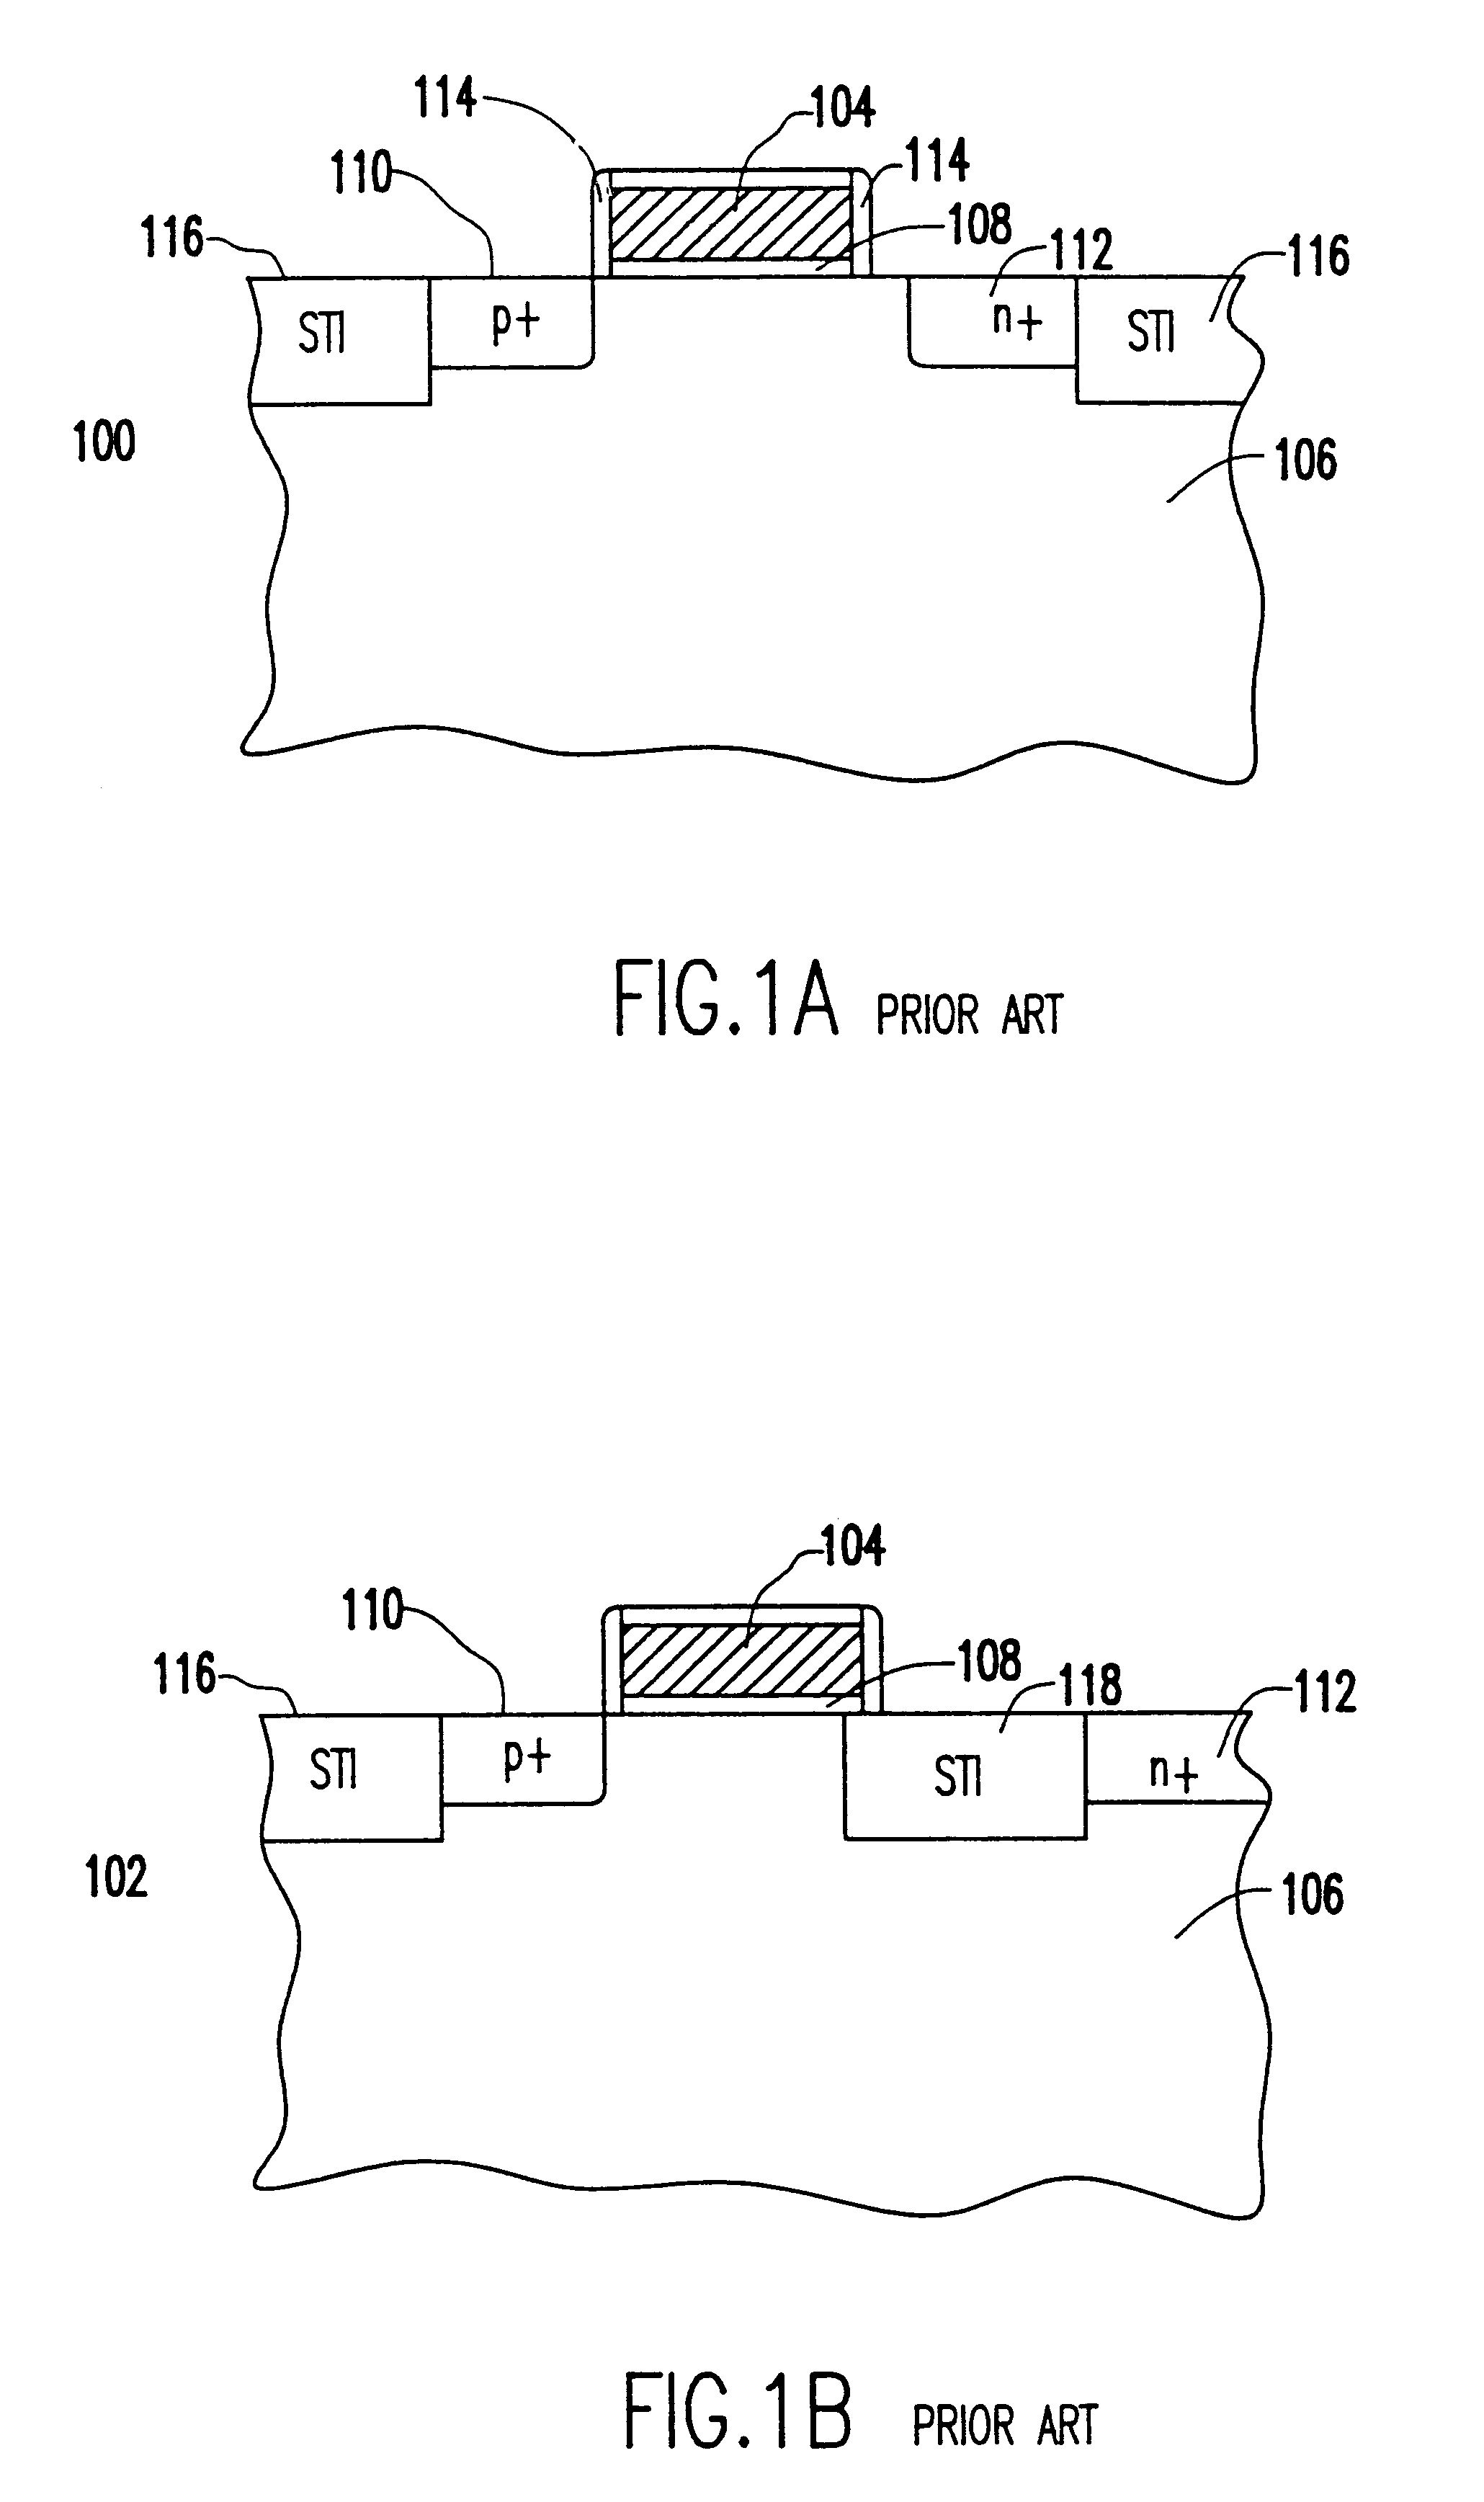 Method of forming a semiconductor diode with depleted polysilicon gate structure